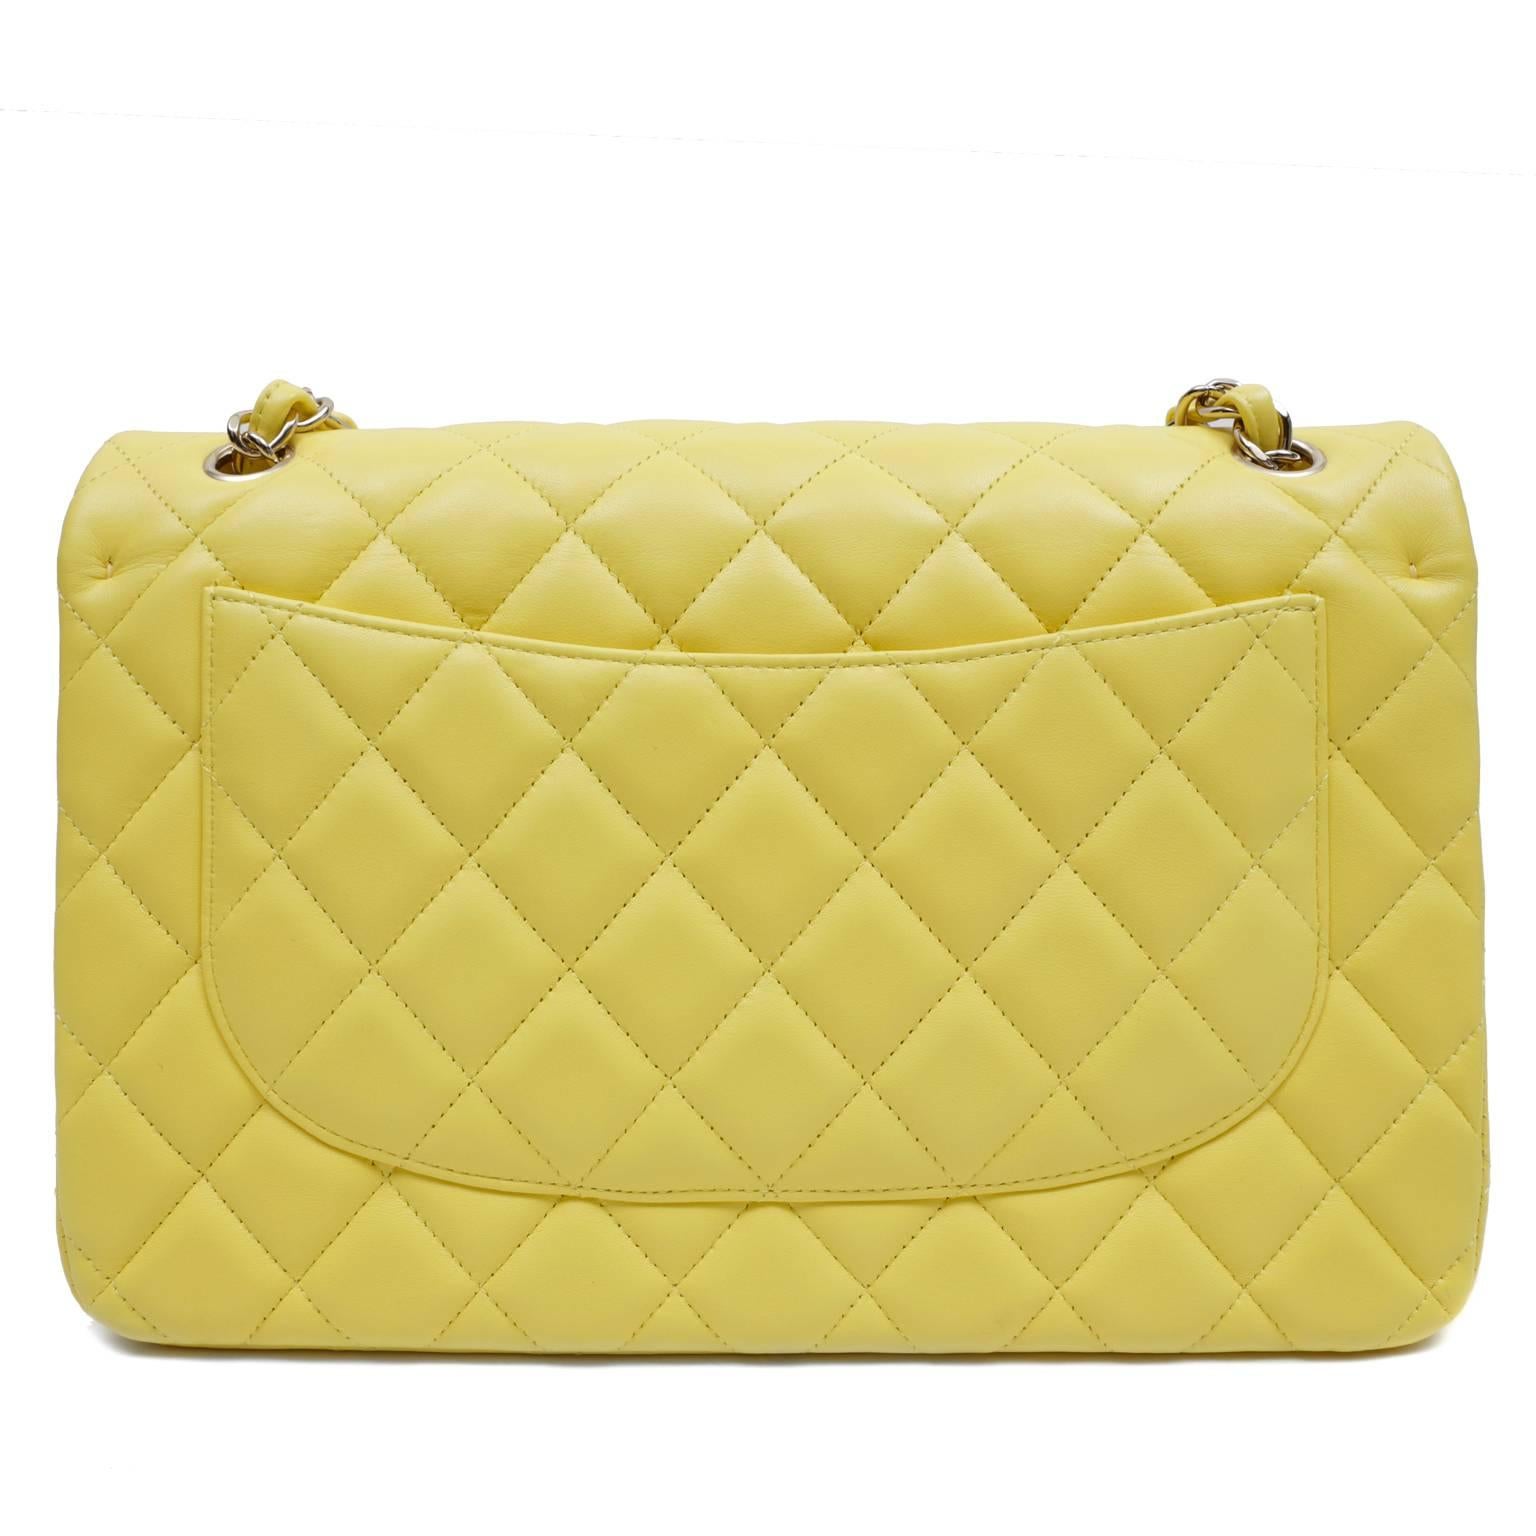 Chanel Yellow Leather Jumbo Classic Flap- PRISTINE
  The classic silhouette draws every eye in the sunny lemon yellow hue.  
Cheerful lemon yellow leather is quilted in signature Chanel diamond stitched pattern.  Silver interlocking CC twist lock